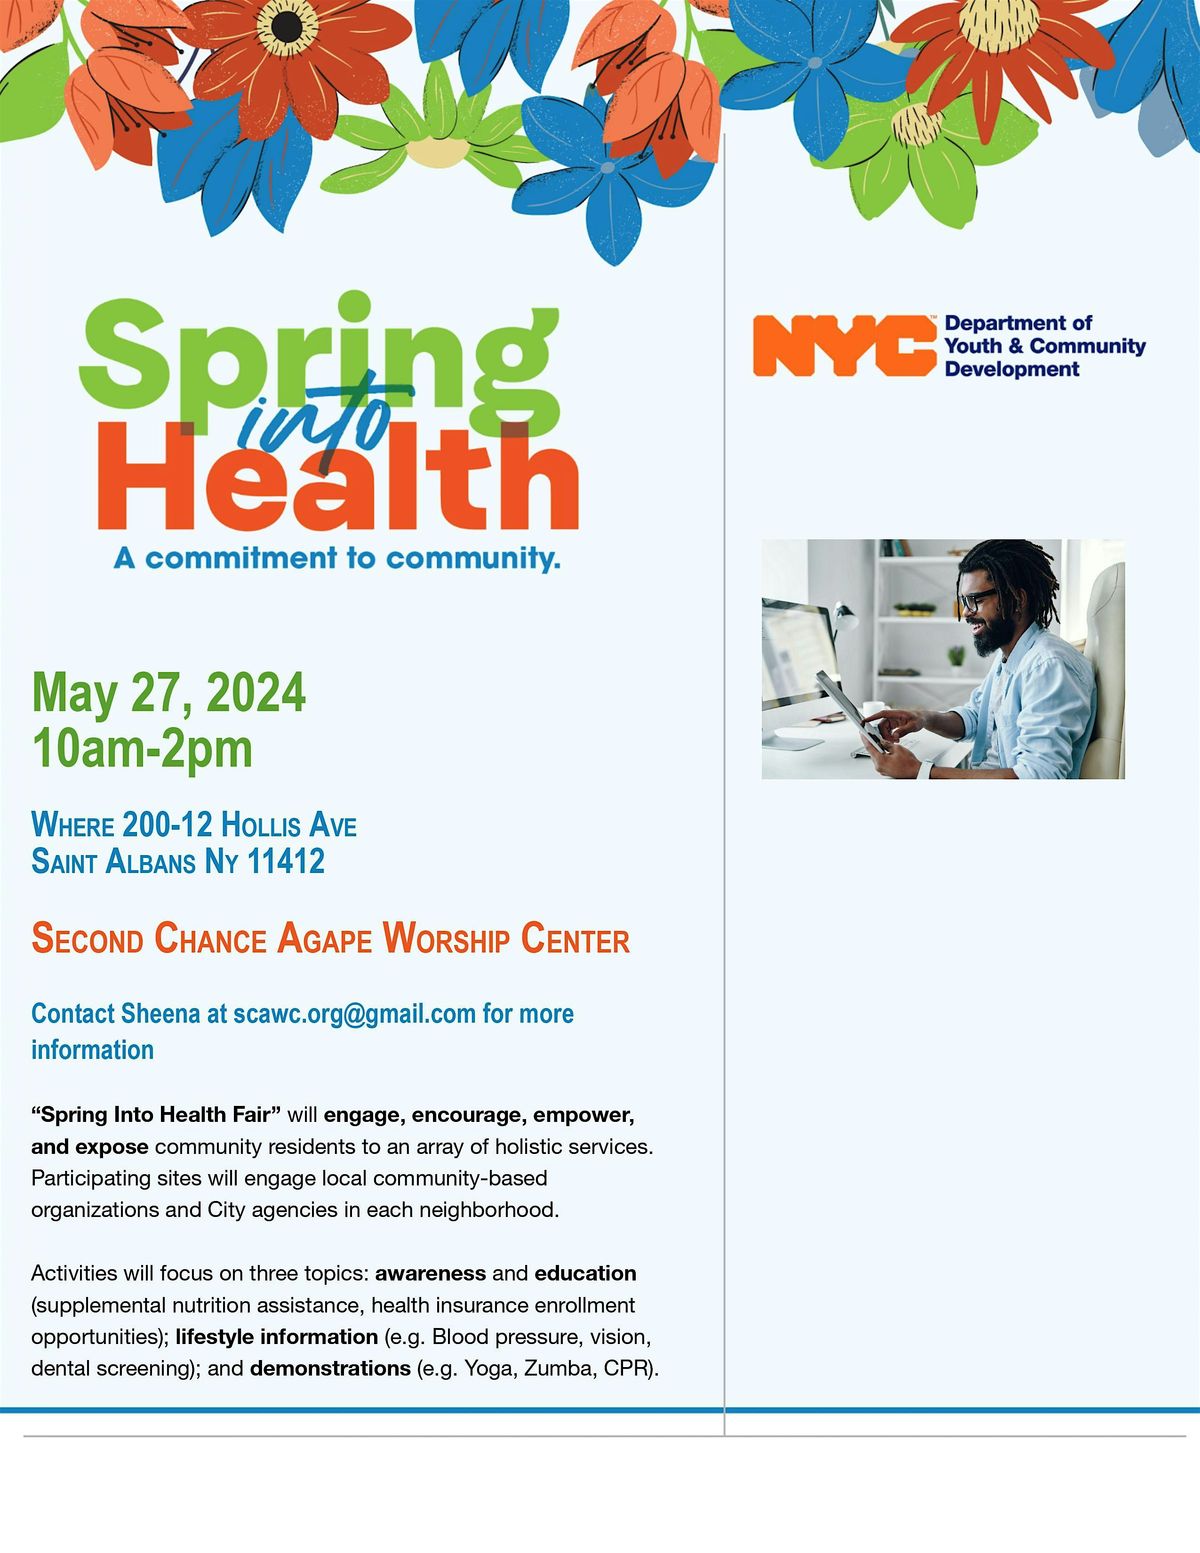 Spring into Health: A Commitment to Community